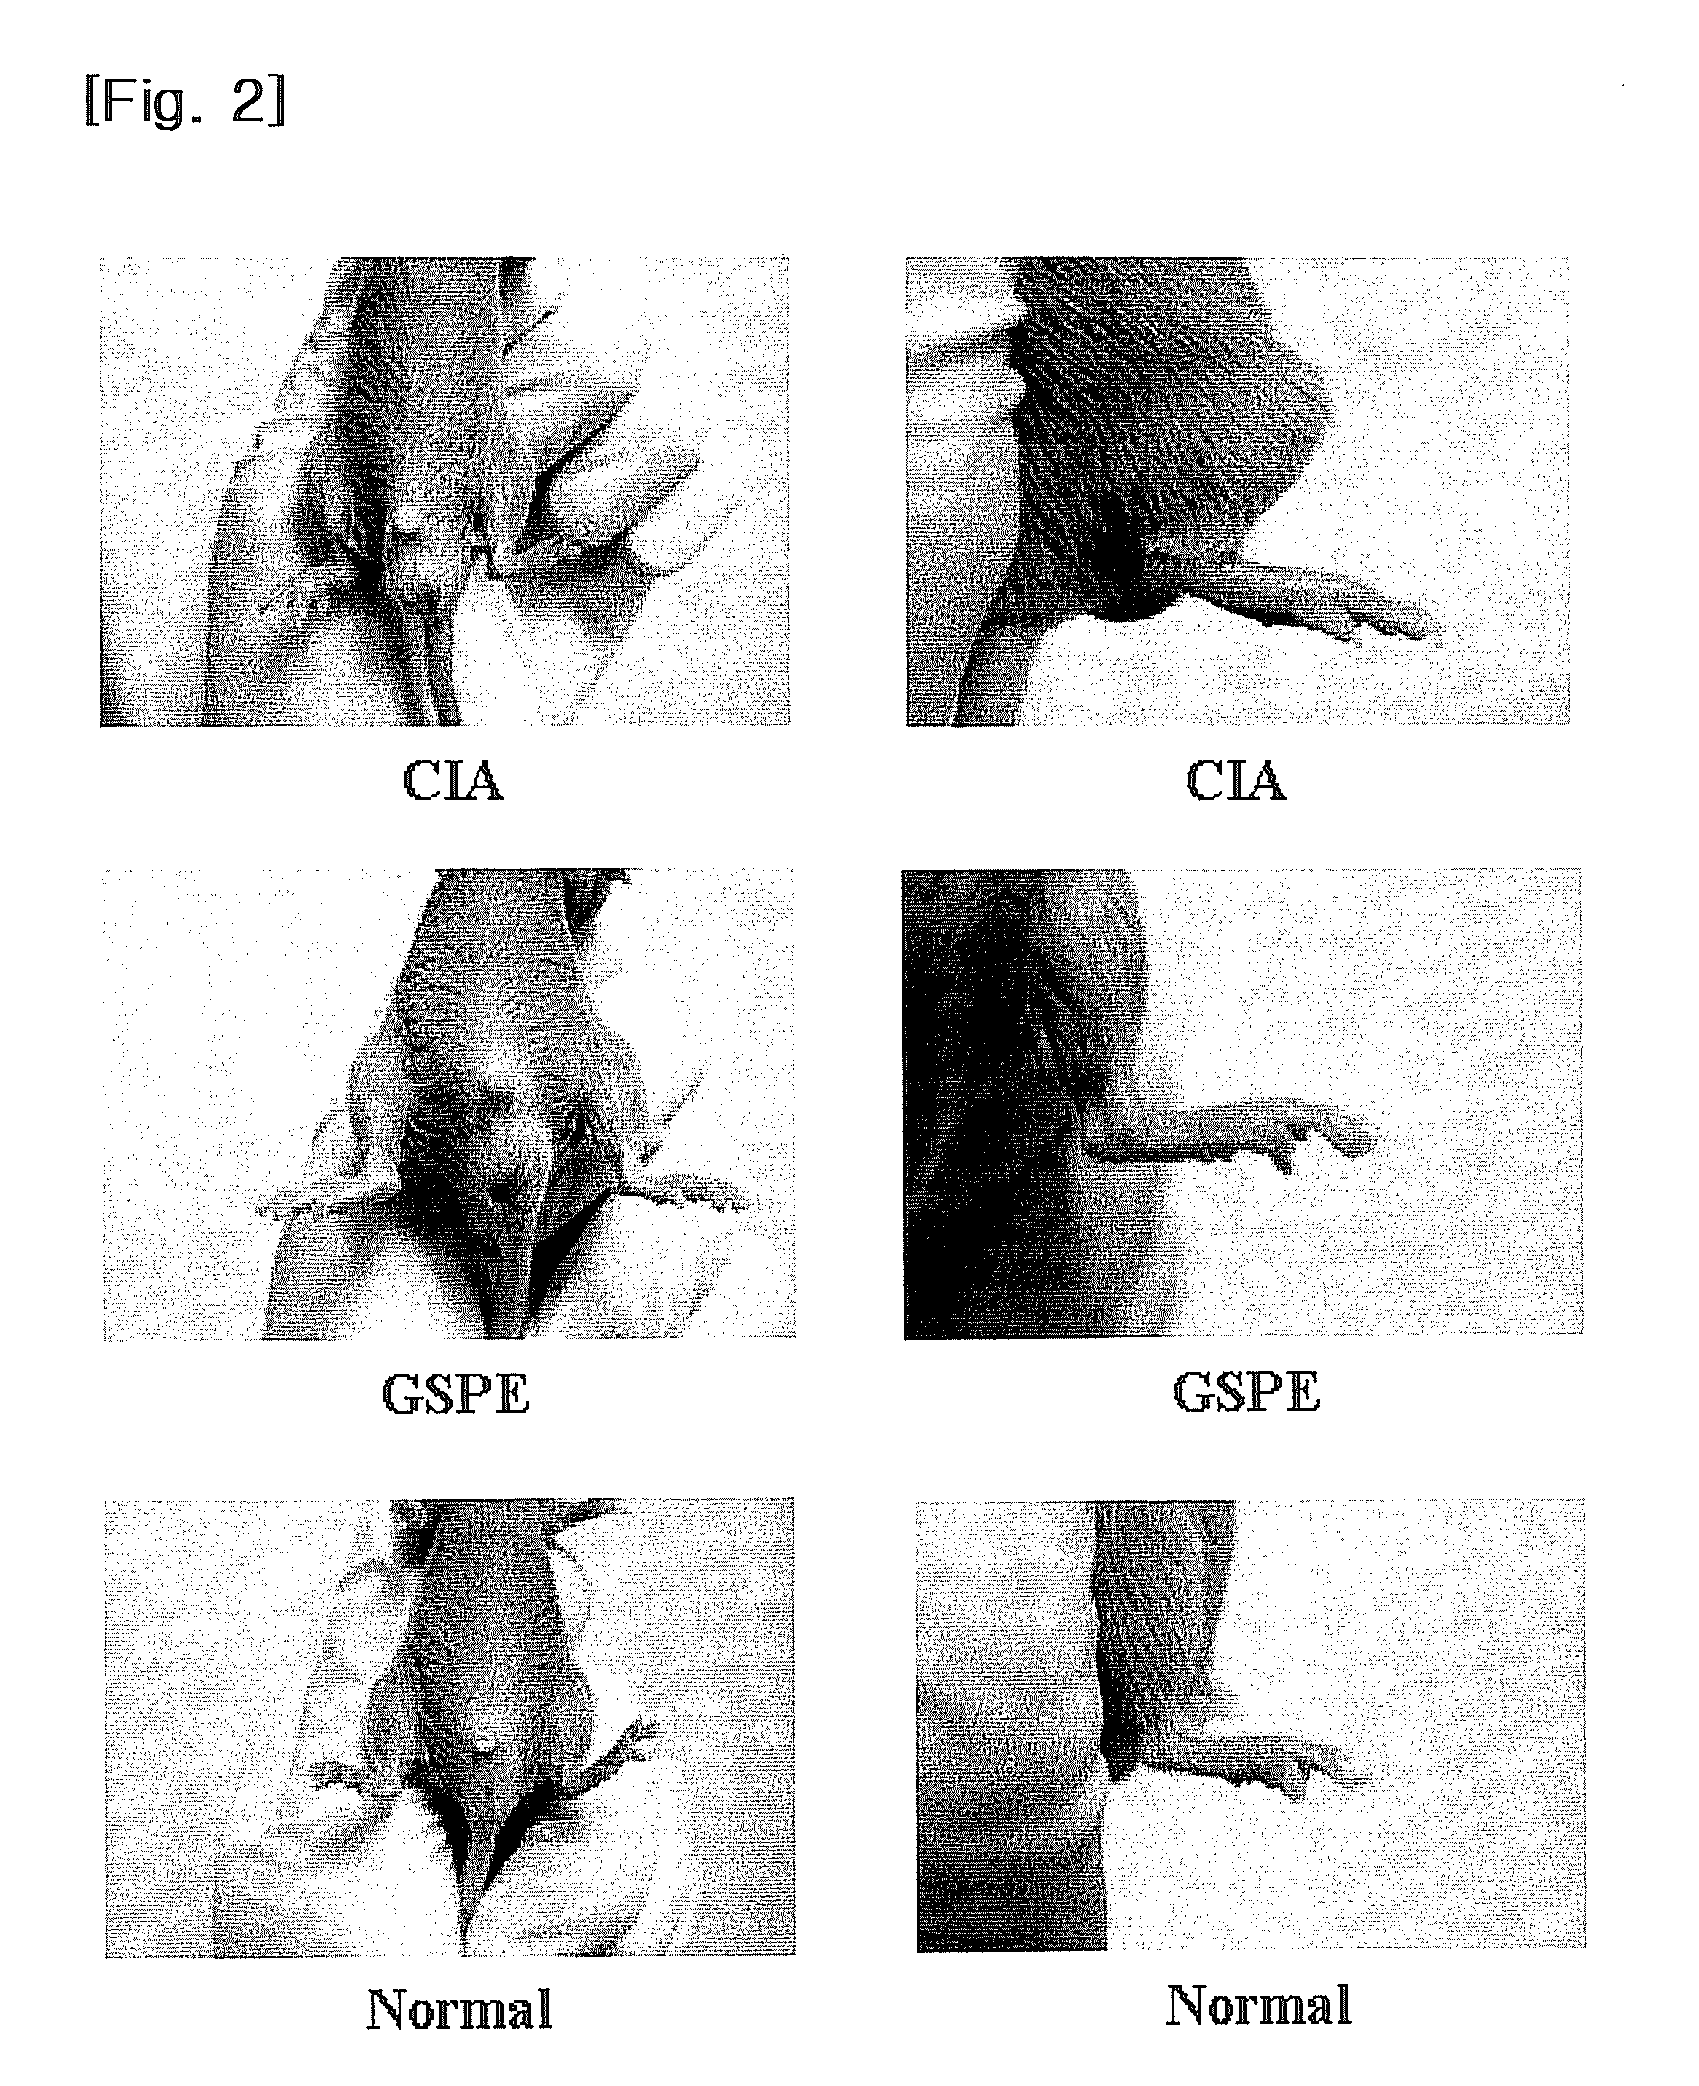 Process for preparing vitis vinifera pip extract and pharmaceutical composition for preventing or treating rheumatoid arthritis comprising the same